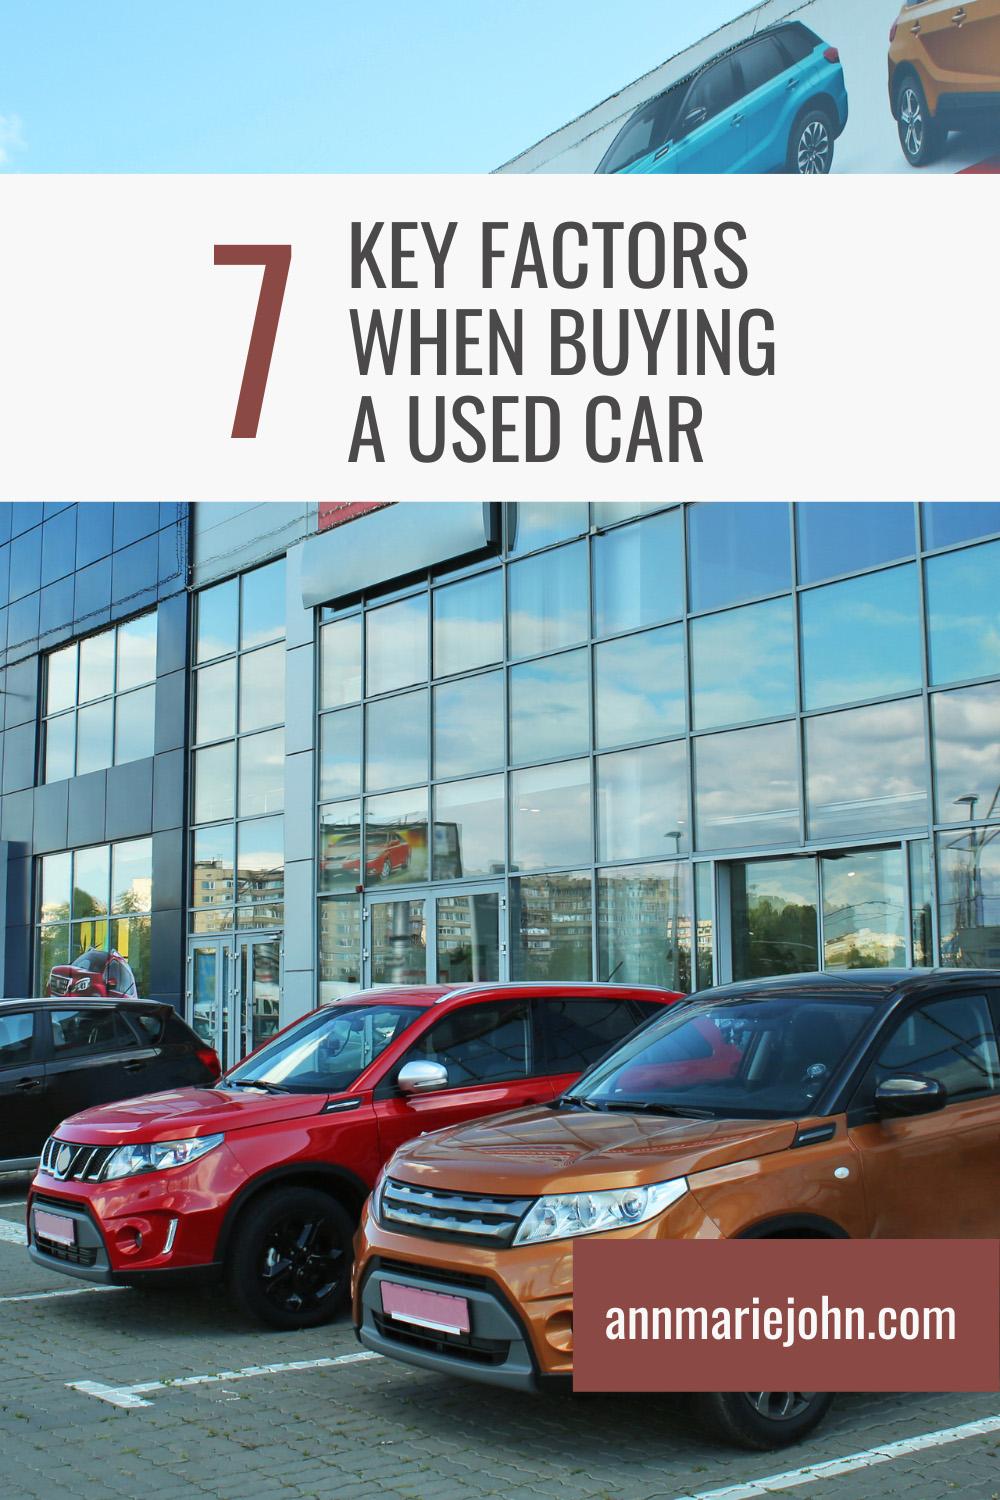 Key Factors When Buying a Used Car